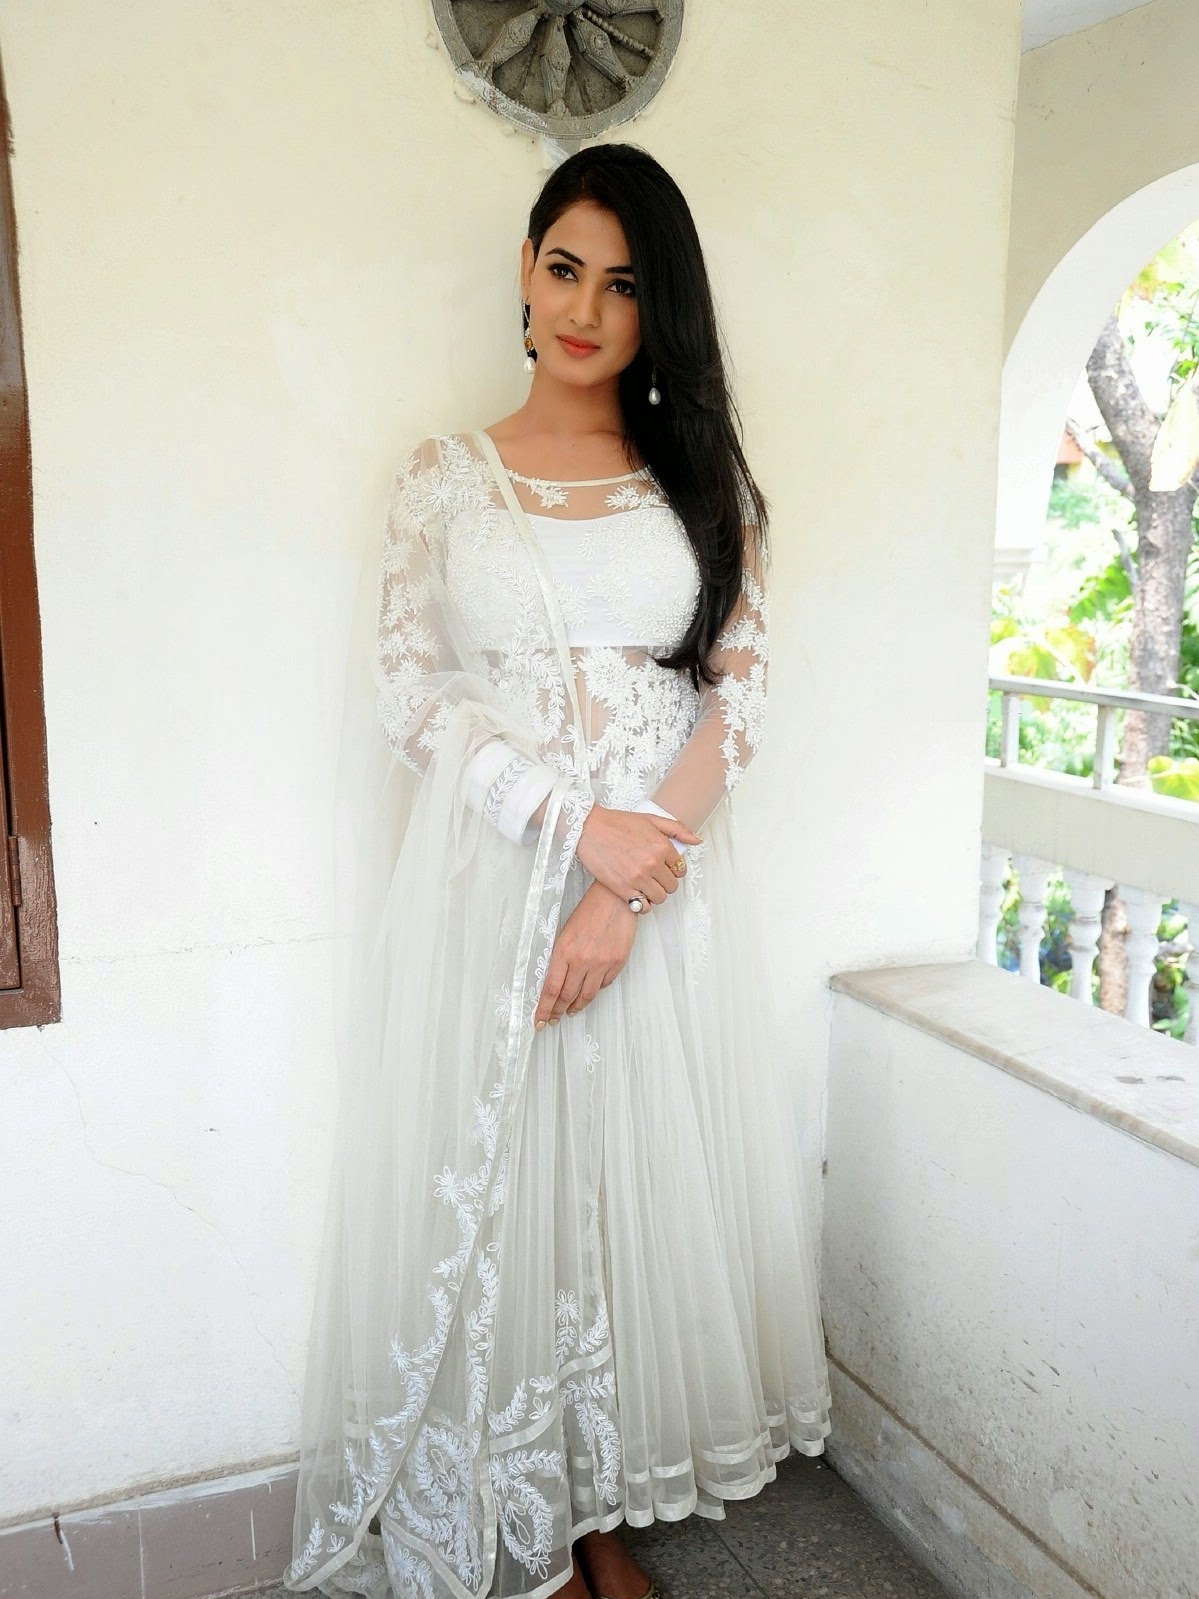 High Quality Bollywood Celebrity Pictures Sonal Chauhan Looks Gorgeous In White Dress At Telugu